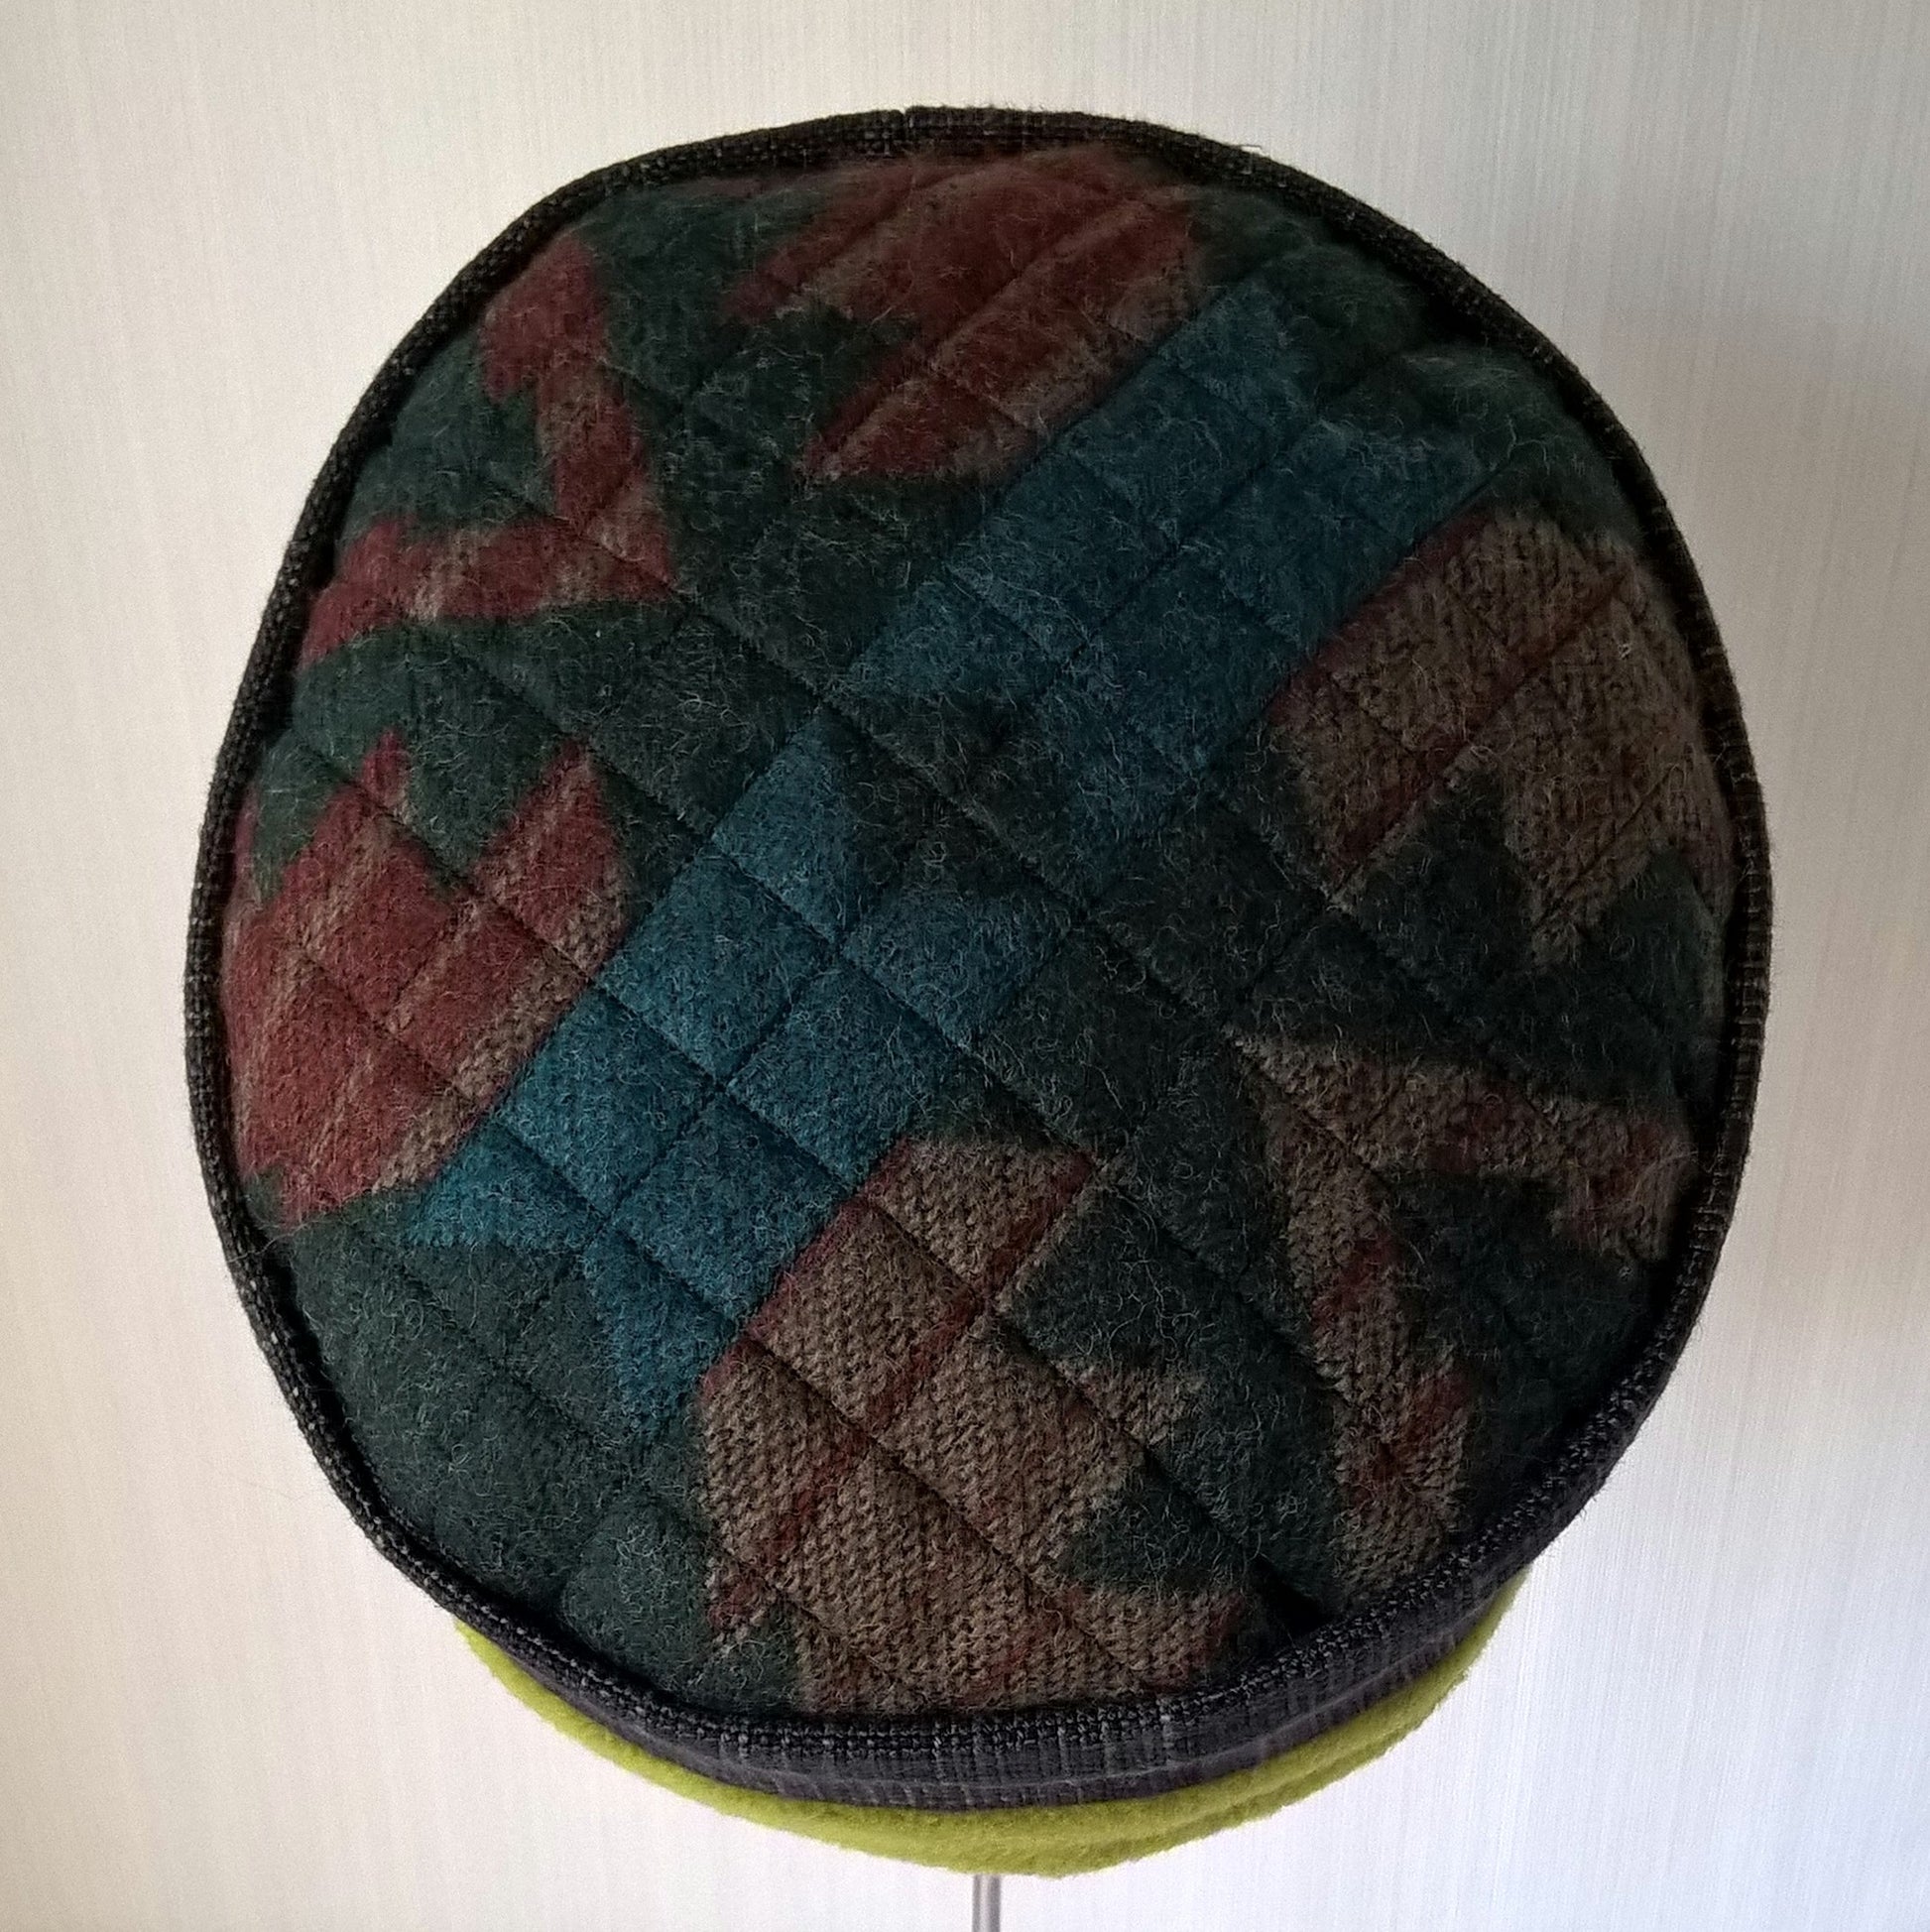 Aztec pattern on tip of quilted fleece hat